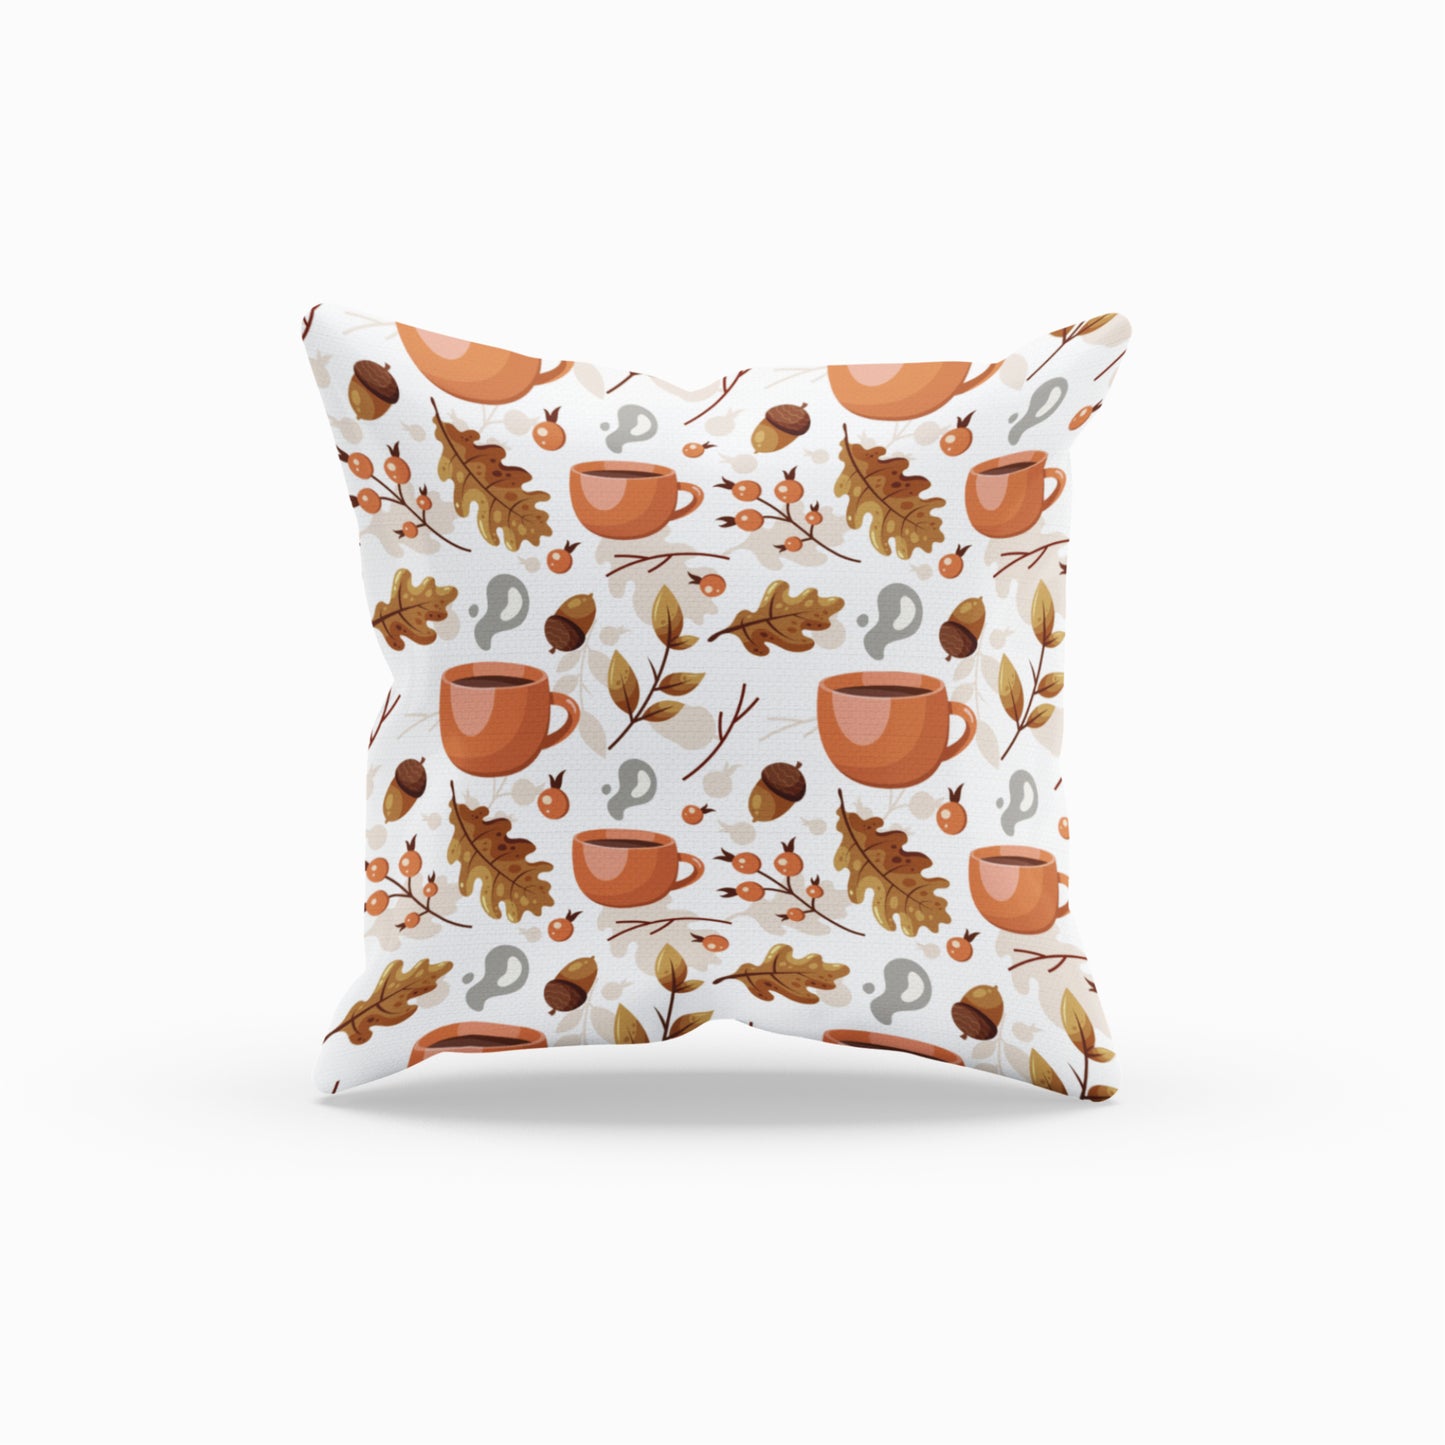 Cozy Fall Coffee Pattern Throw Pillow, Autumn Home Decor Pillow Case by Homeezone